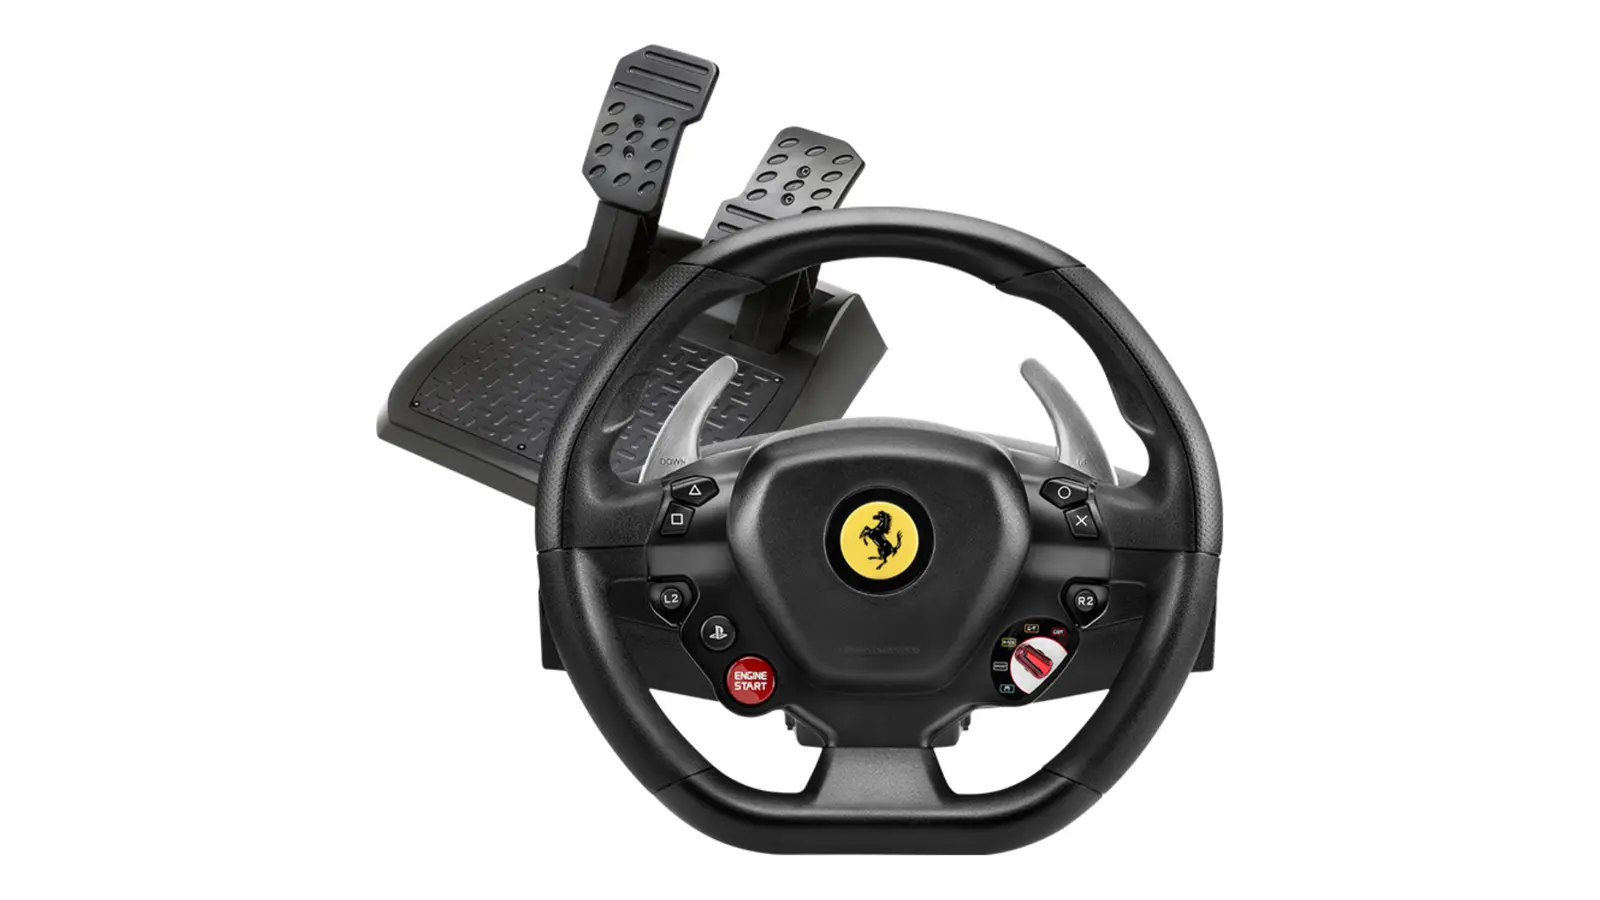 Thrustmaster T80 Ferrari 488 GTB Edition product image of a black racing wheel featuring red buttons and a Ferrari logo in the centre next to a set of pedals.